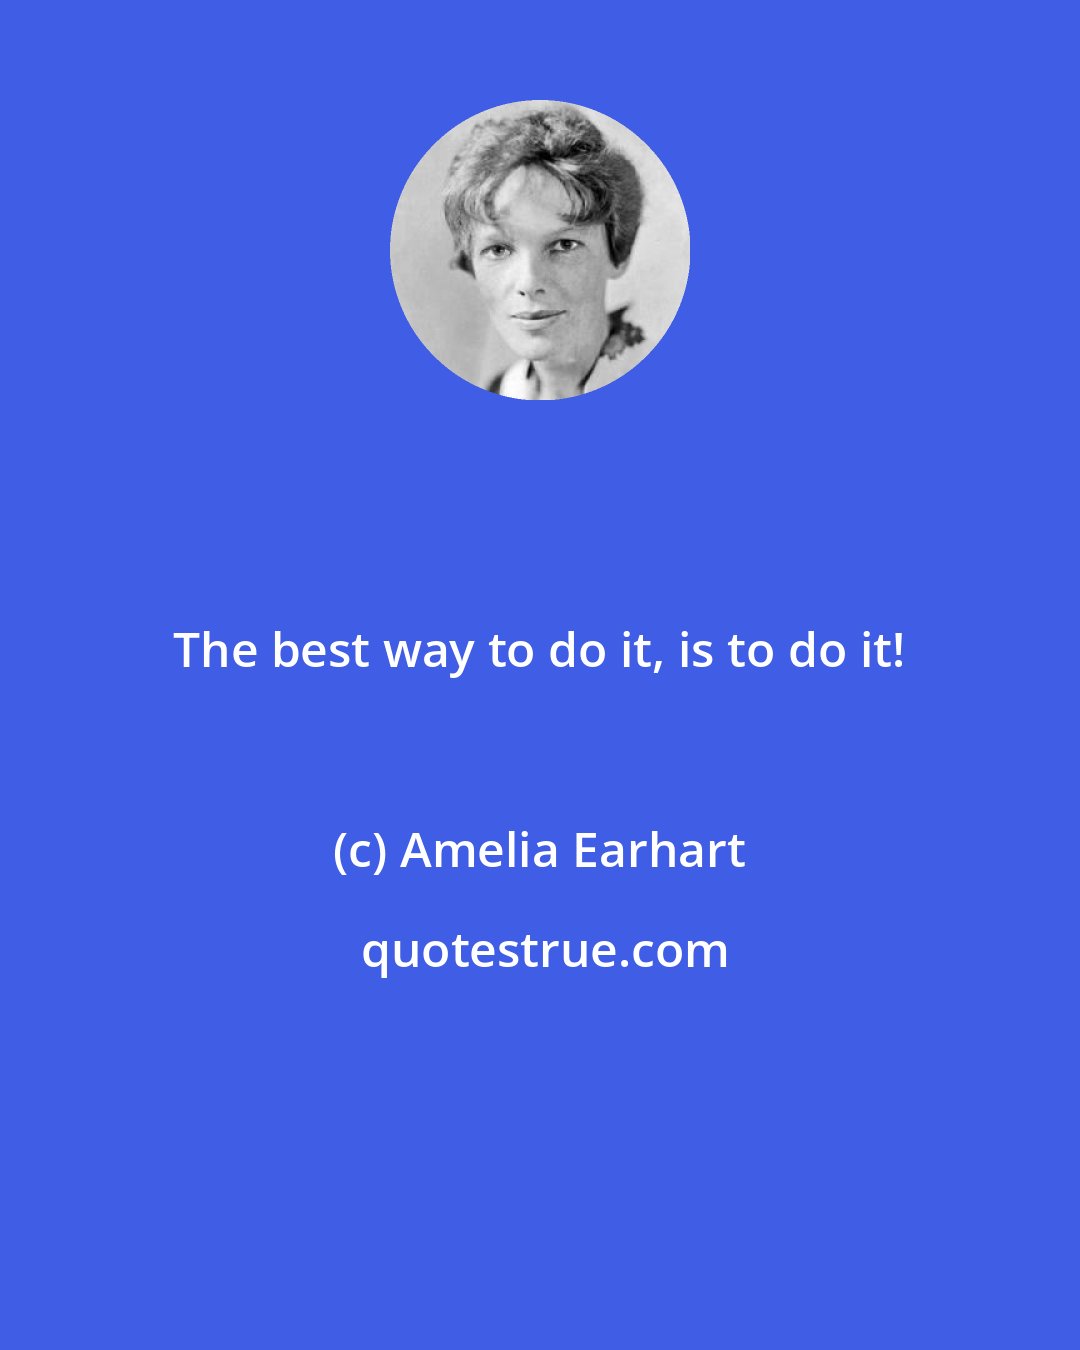 Amelia Earhart: The best way to do it, is to do it!